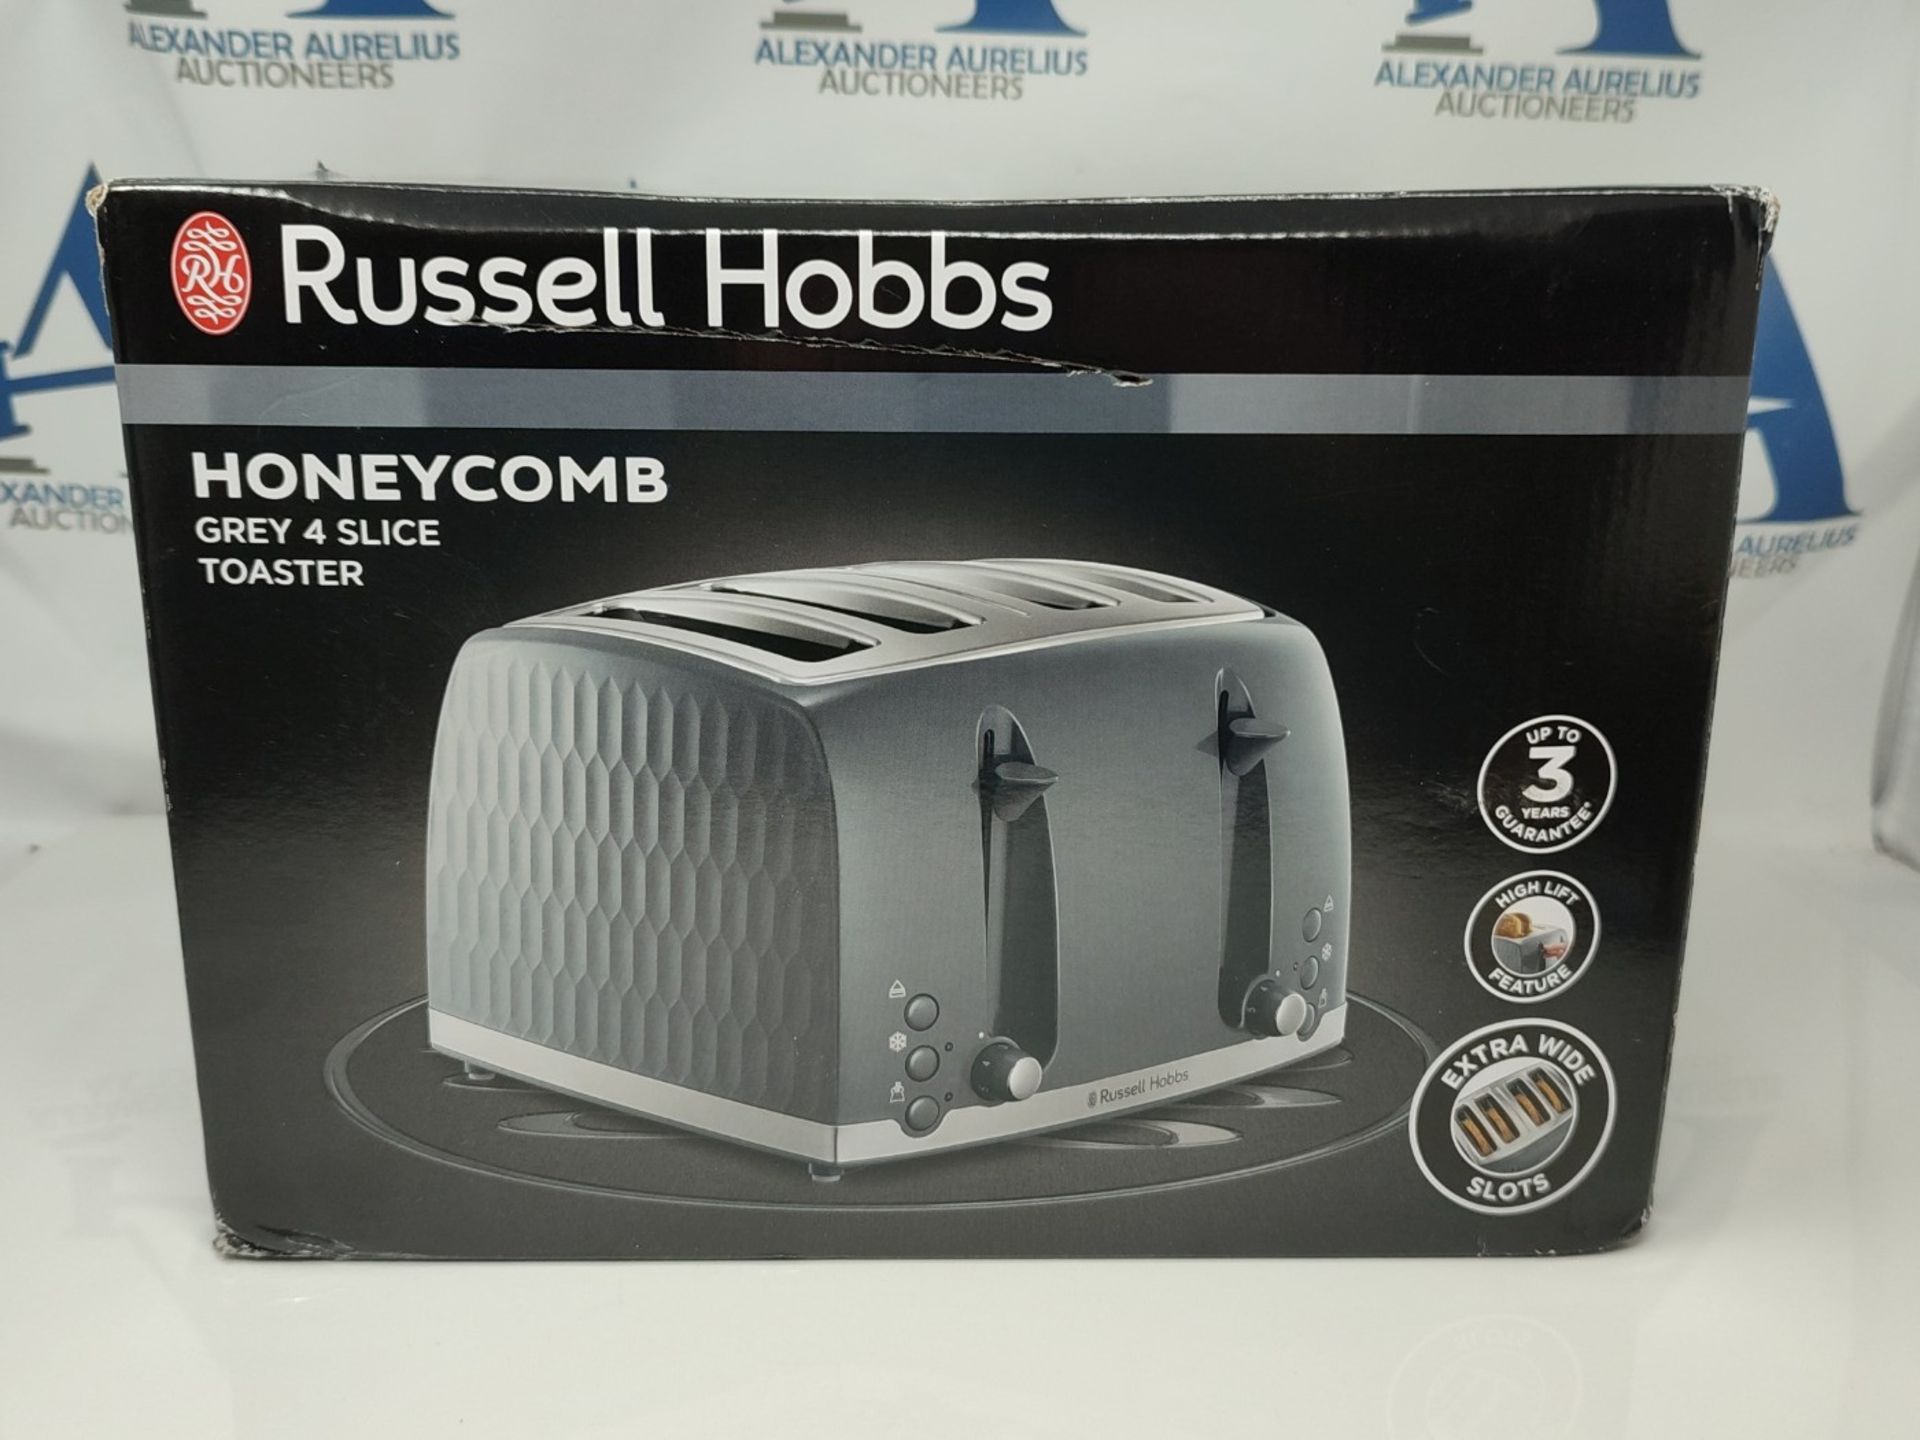 Russell Hobbs 26073 4 Slice Toaster - Contemporary Honeycomb Design with Extra Wide Sl - Image 2 of 3